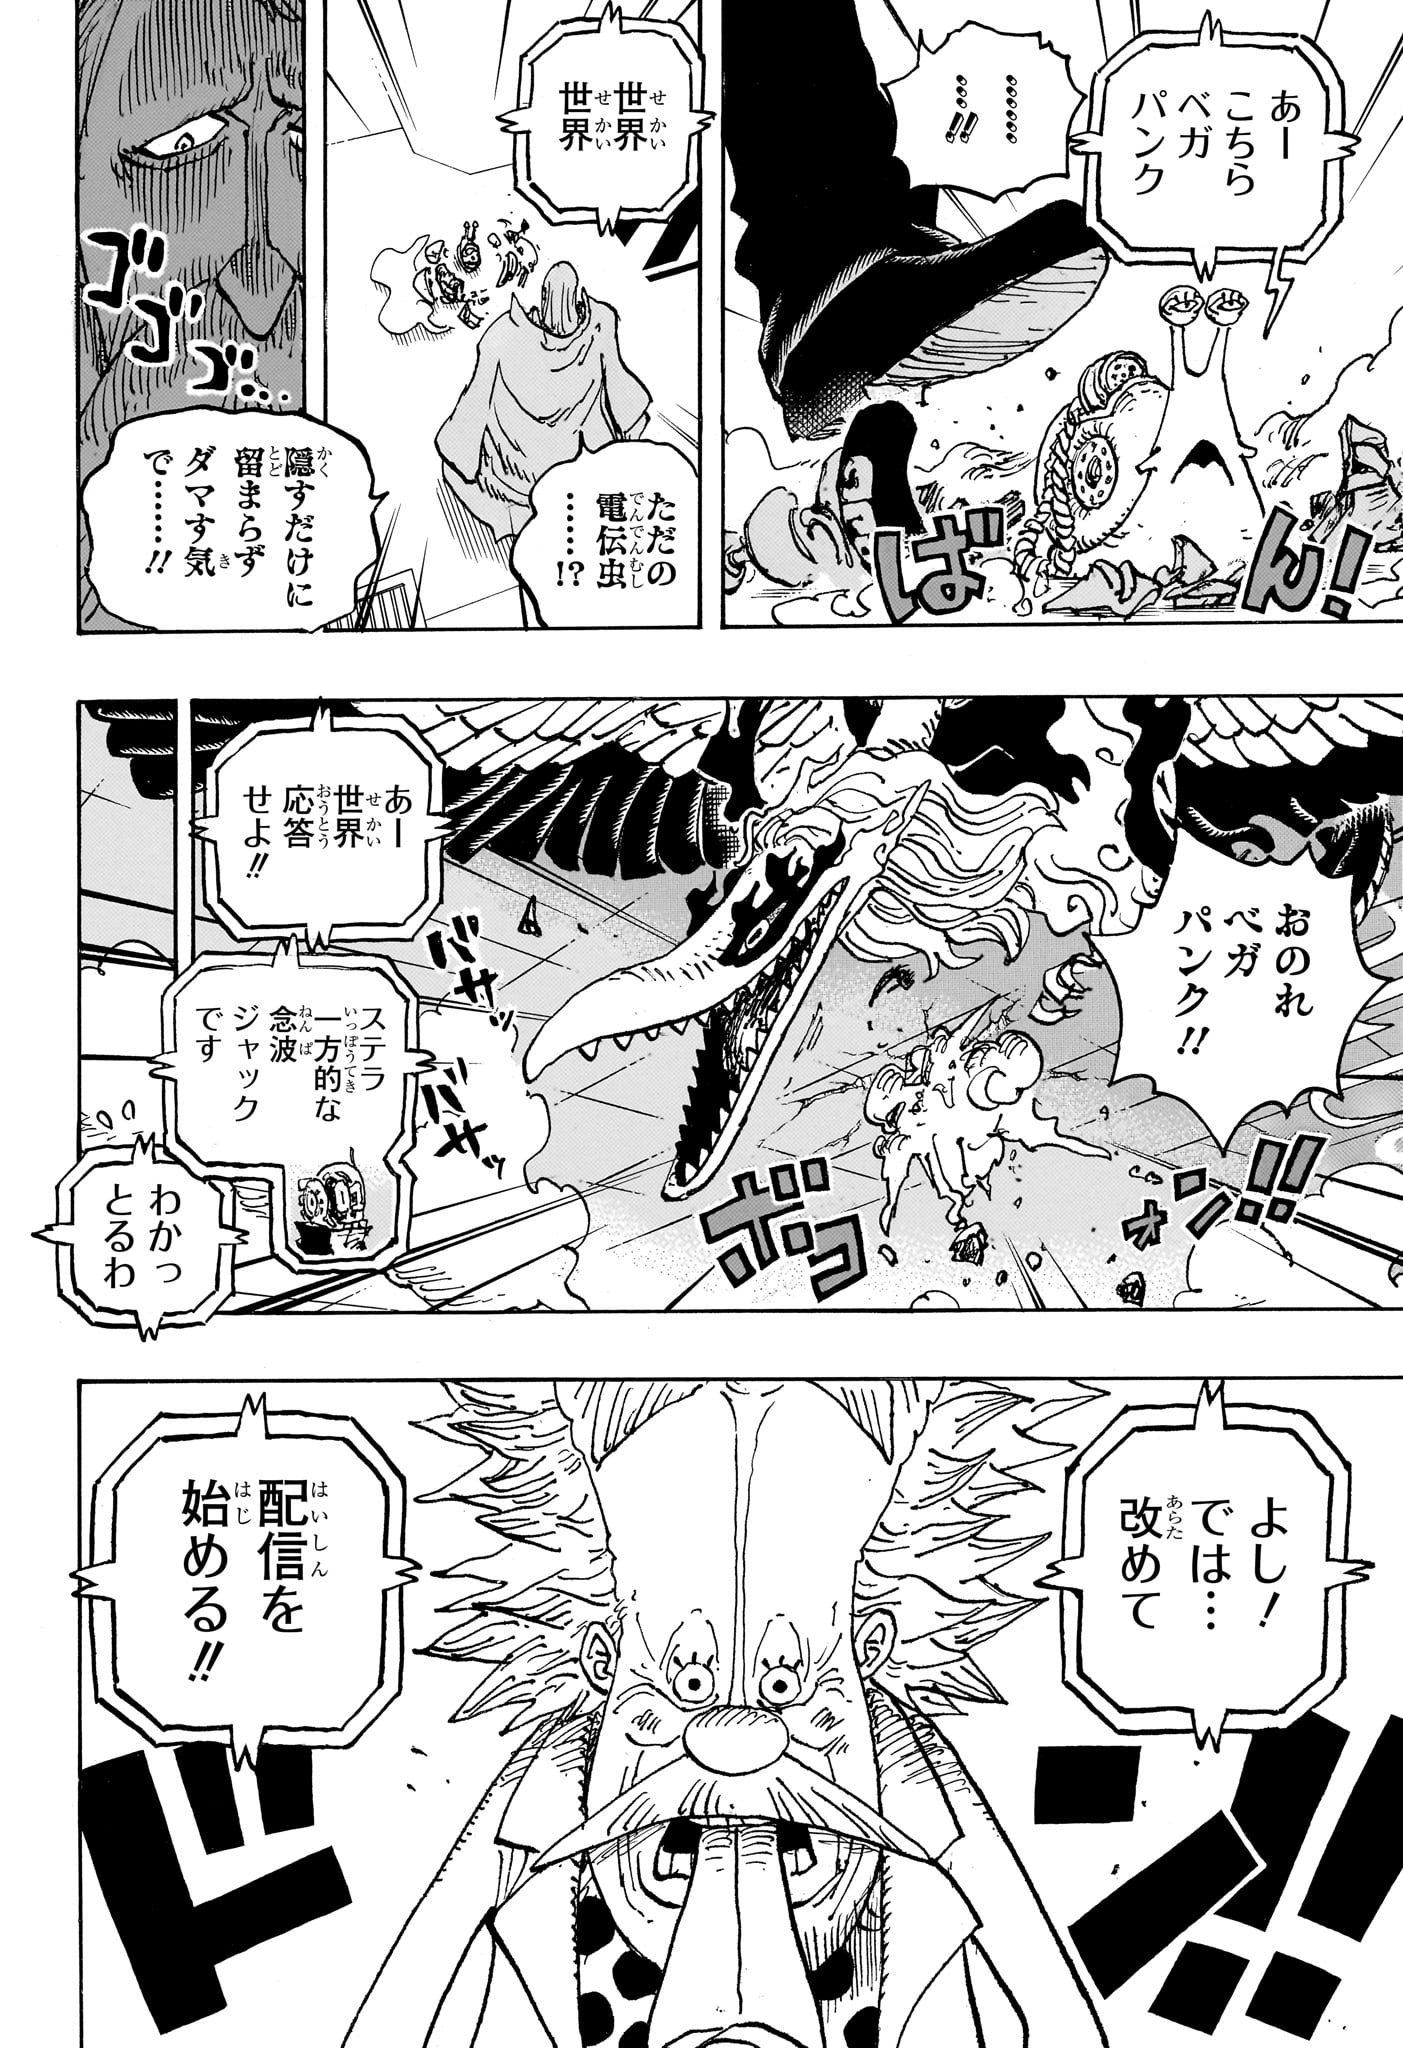 One Piece - Chapter 1113 - Page 8